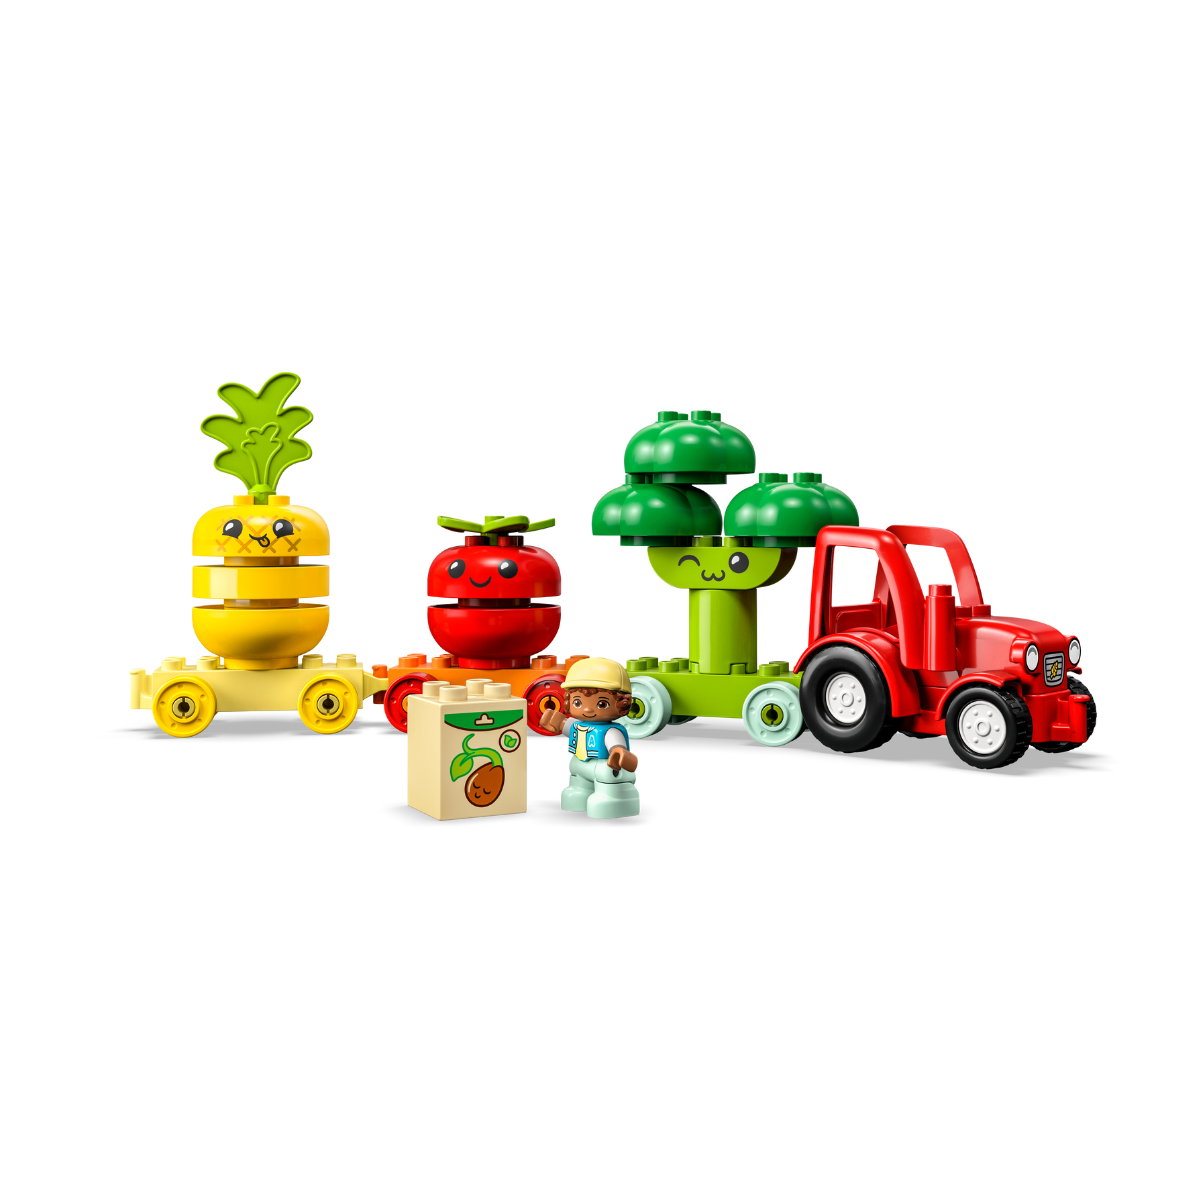 Duplo My First Fruit And Vegetable Tractor